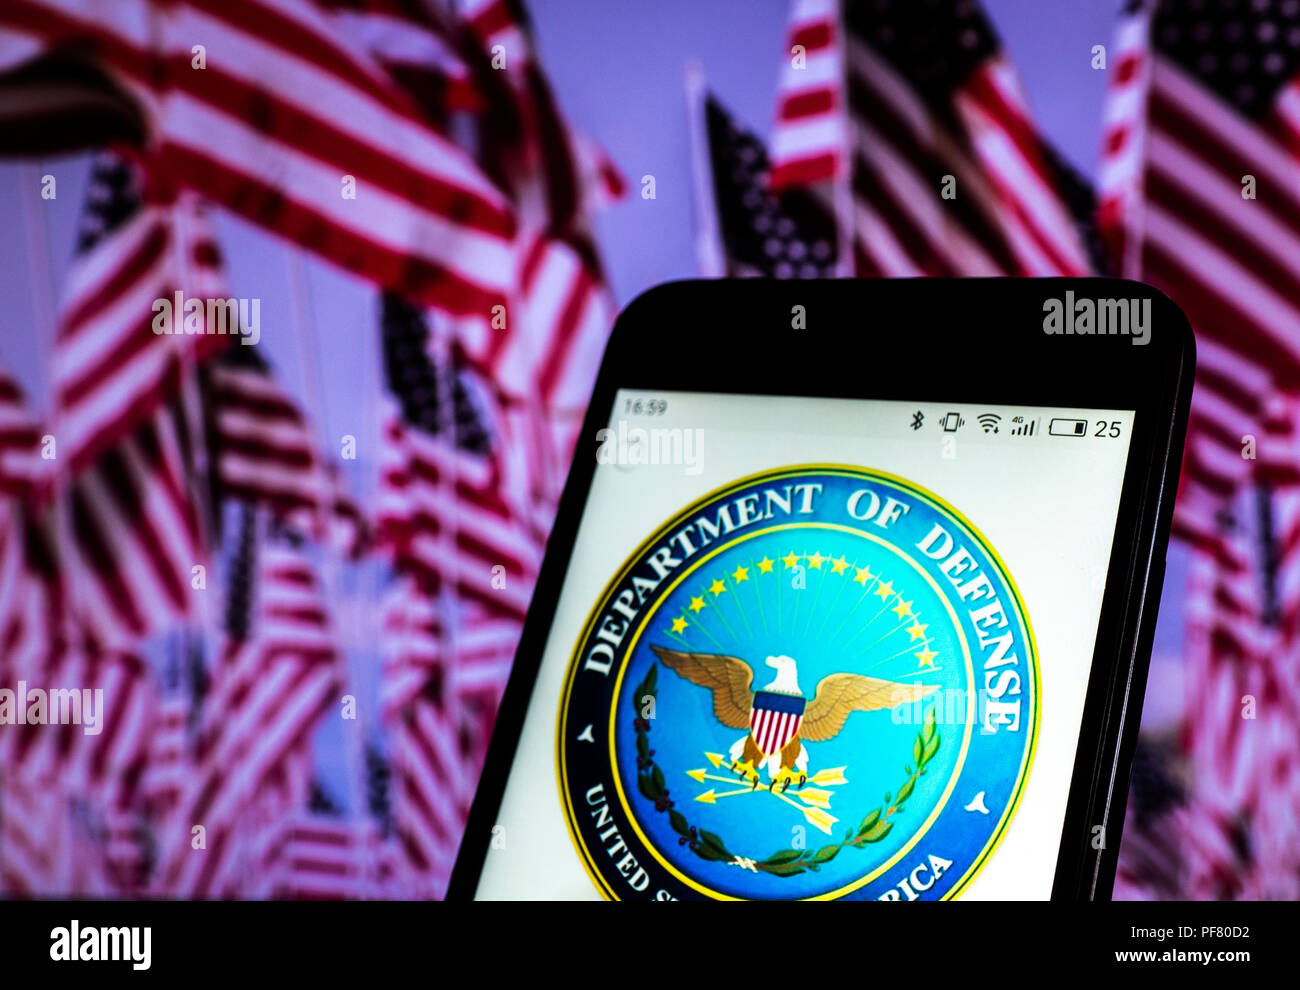 Seal of United States Department of Defense seen displayed on a smart phone. Stock Photo